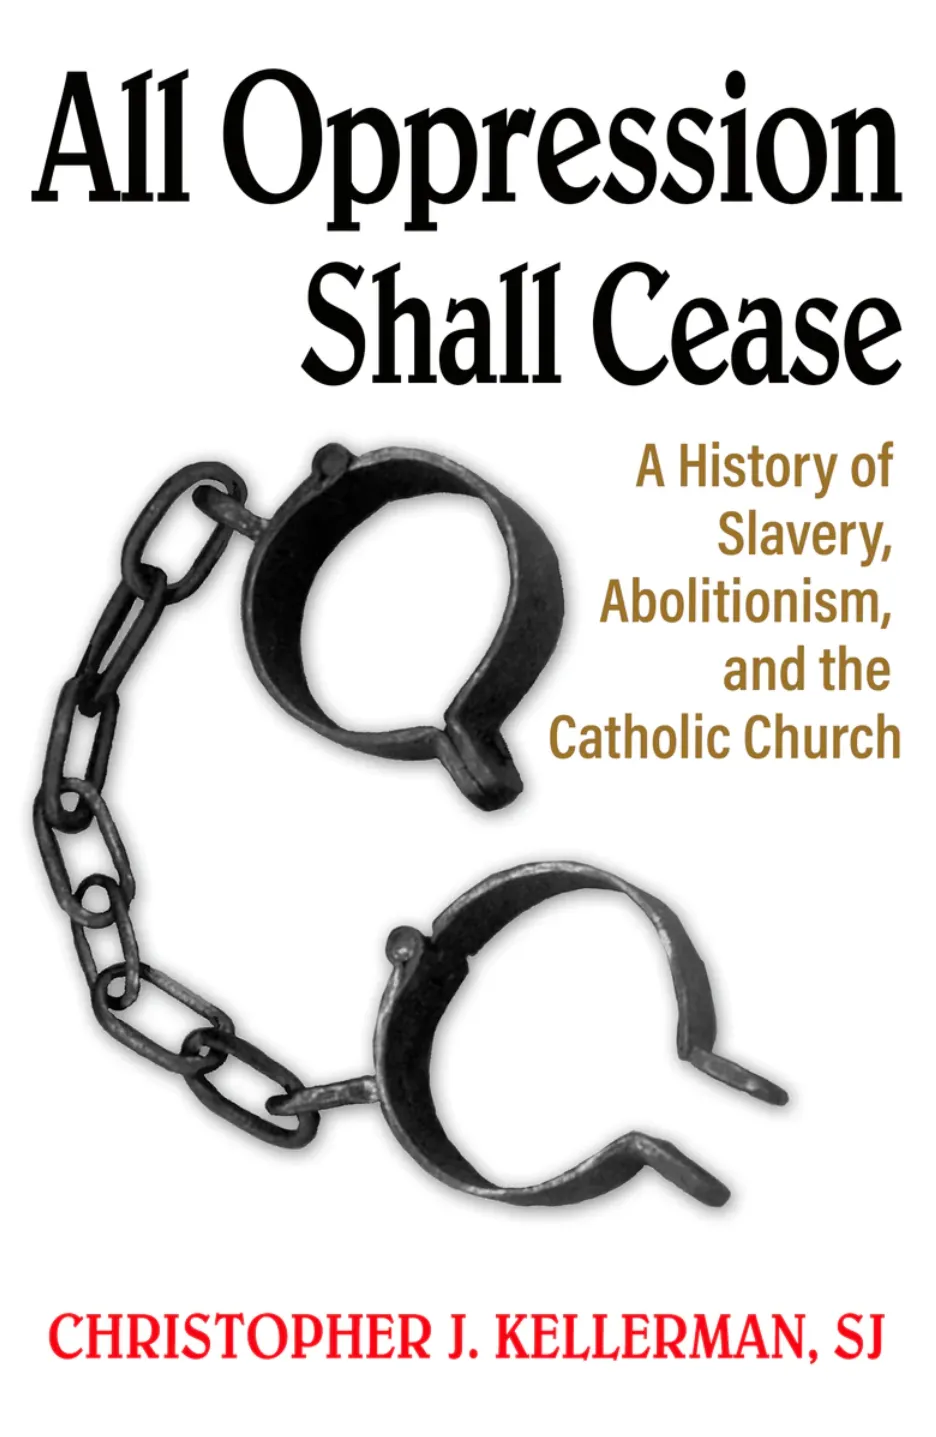 Interview: Fr Chris Kellerman, SJ on his new book 'All Oppression Shall Cease', covering Catholic slavery and abolitionism